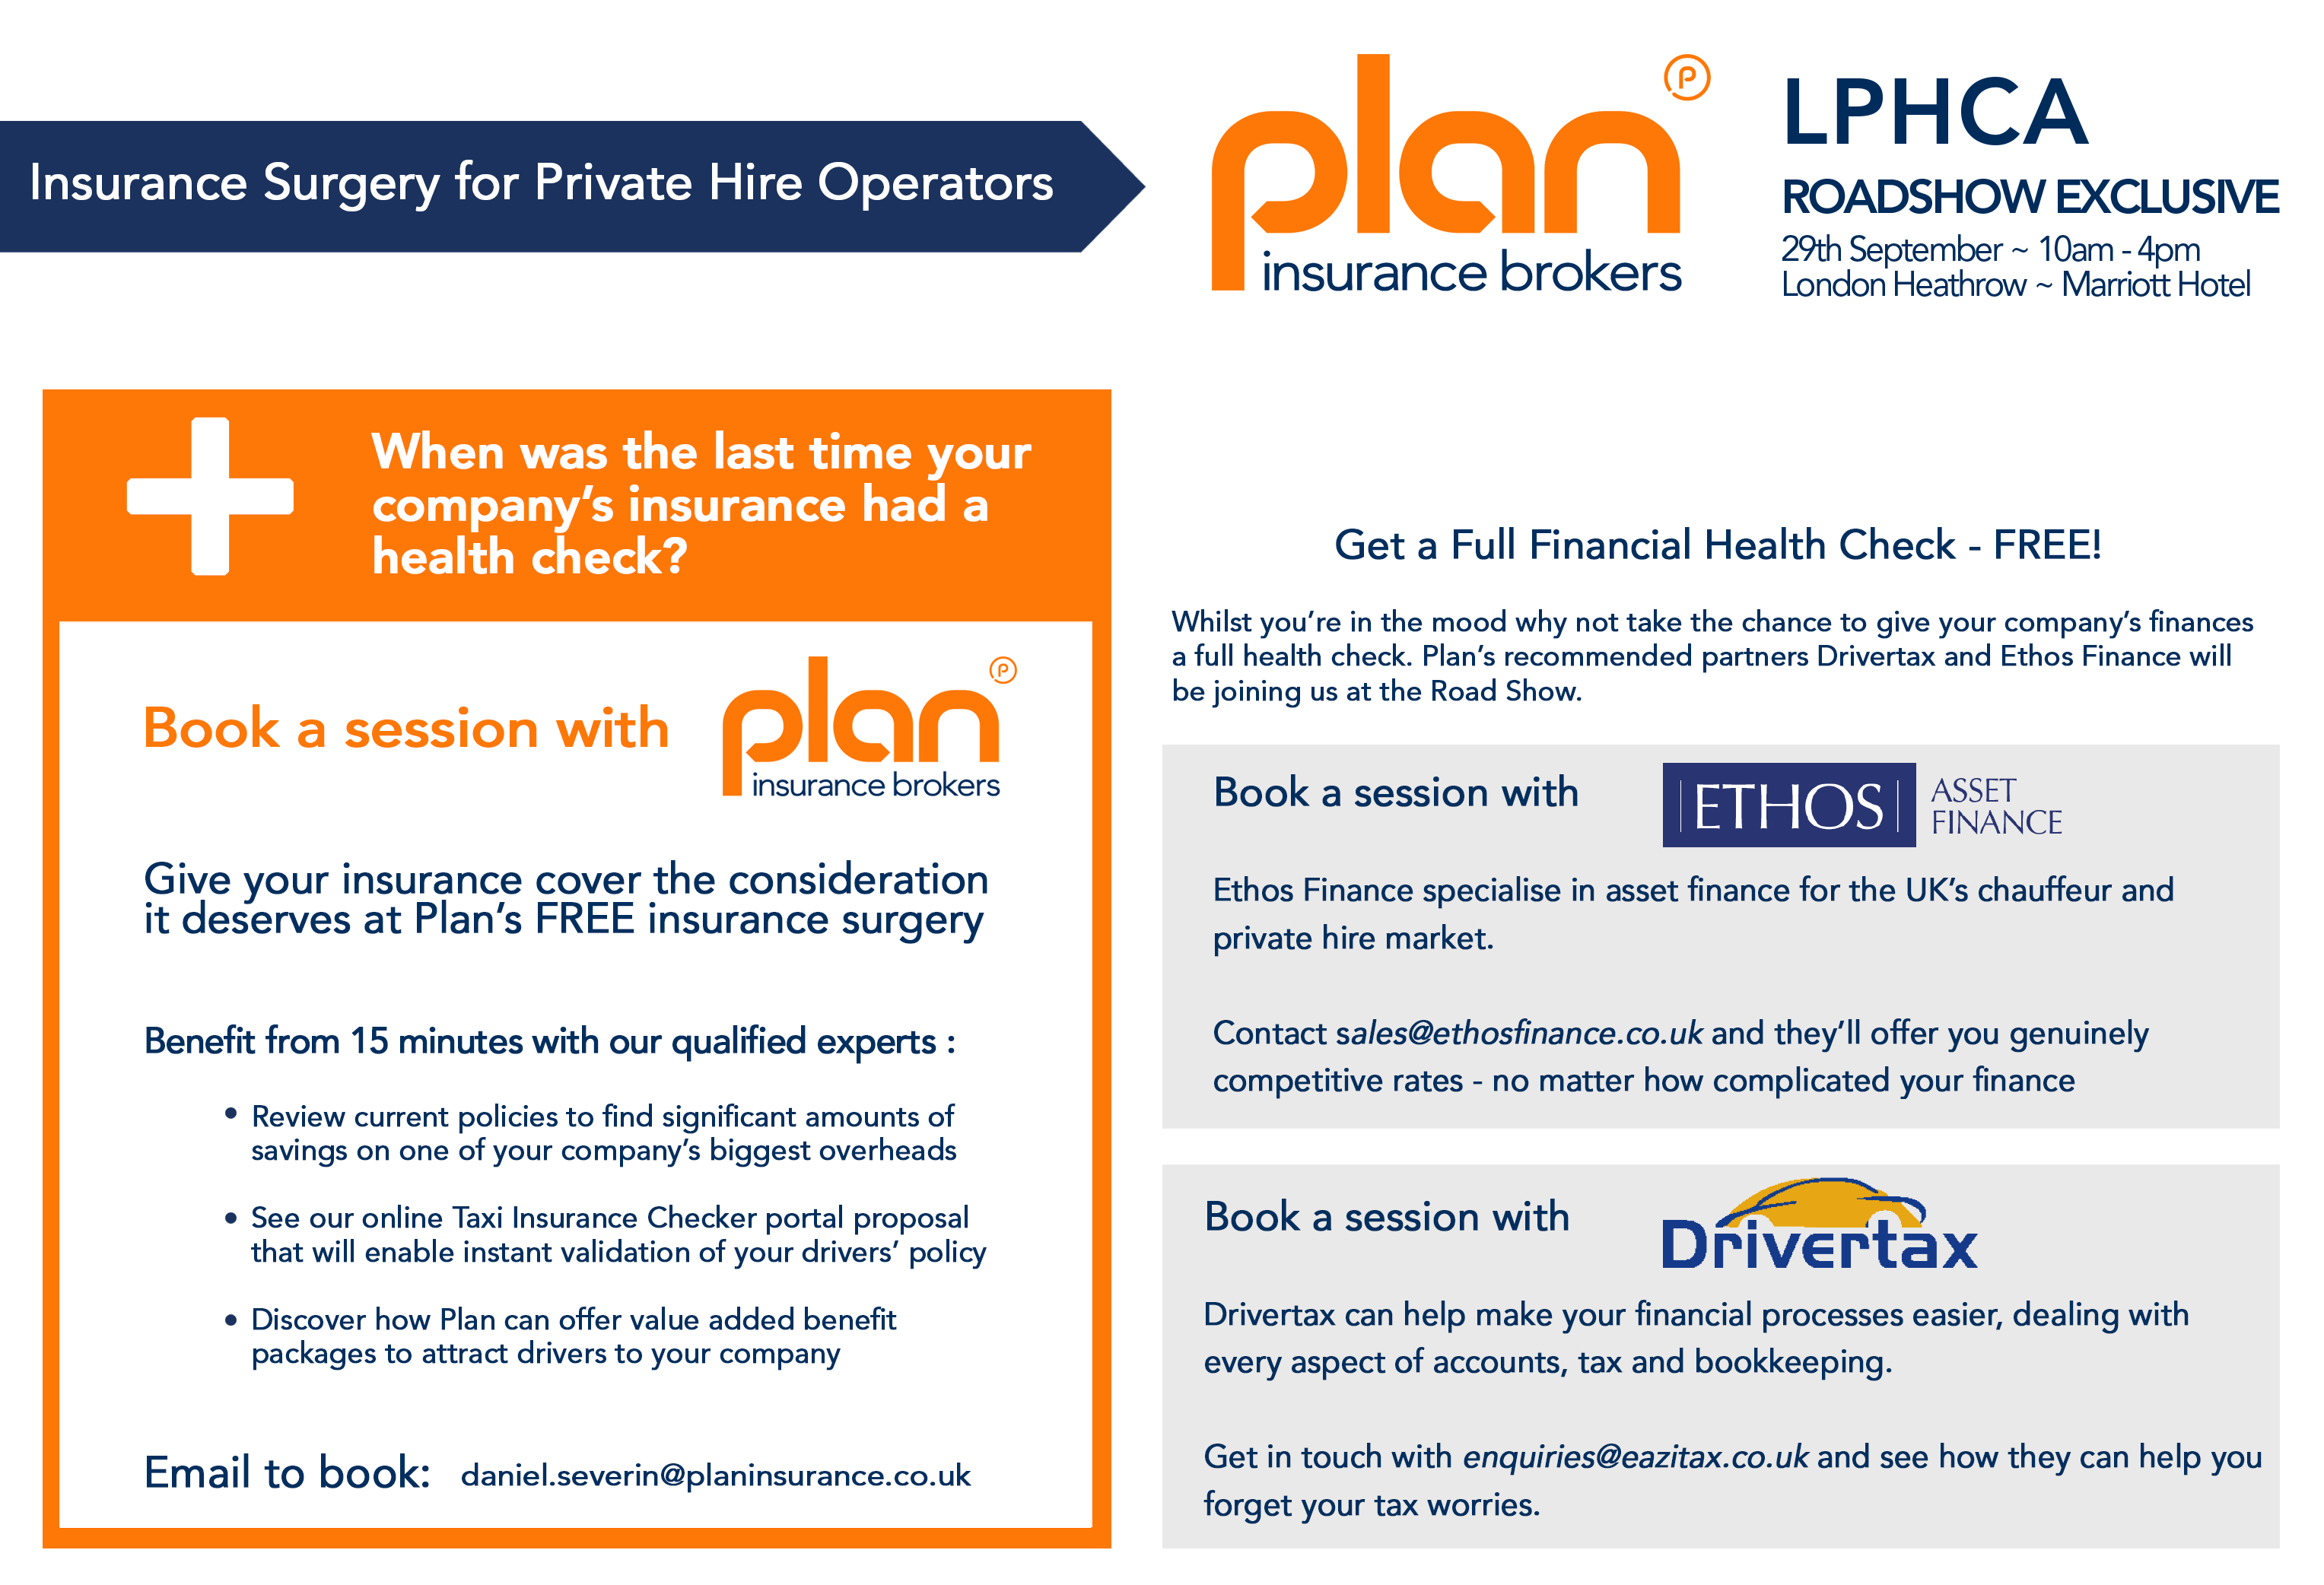 Insurance Surgery for Private Hire Operators - FREE with Plan Insurance Brokers